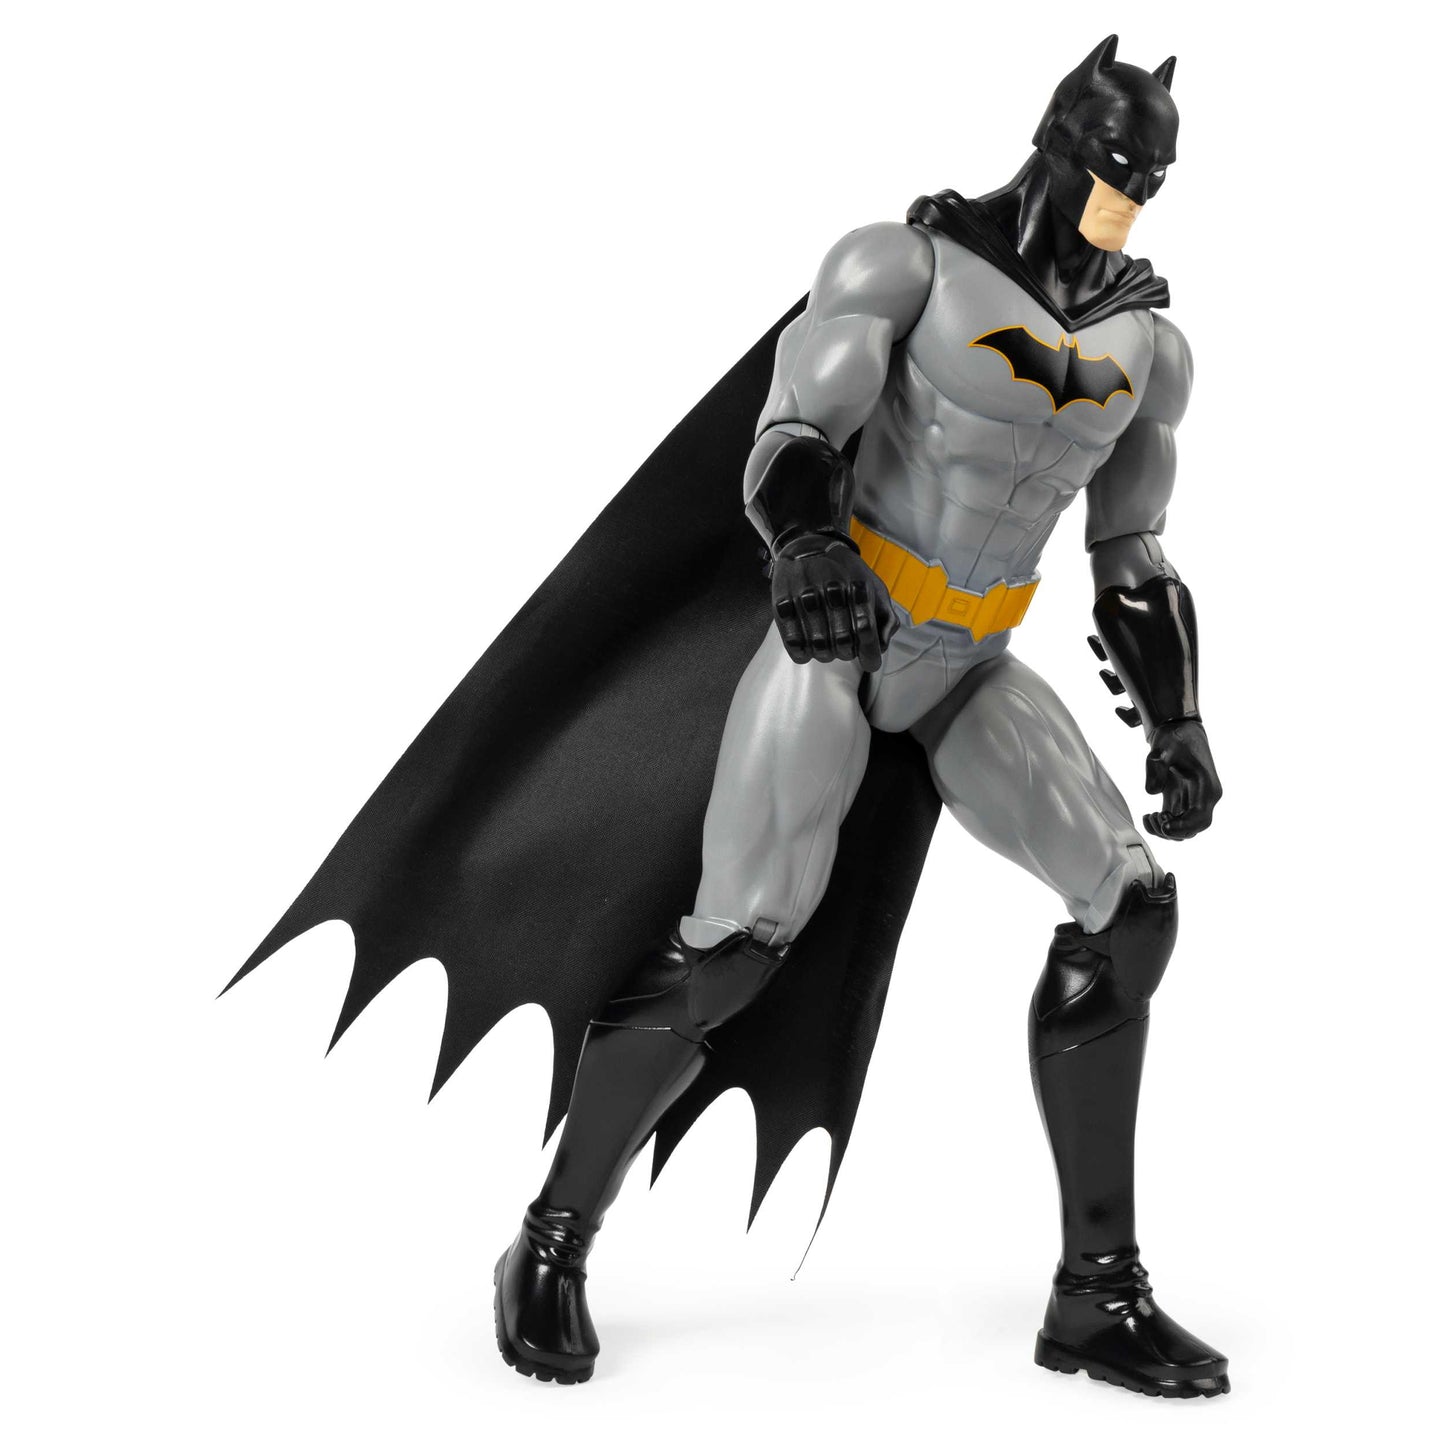 Batman 12-inch Rebirth Action Figure, Kids Toys for Boys Aged 3 and up